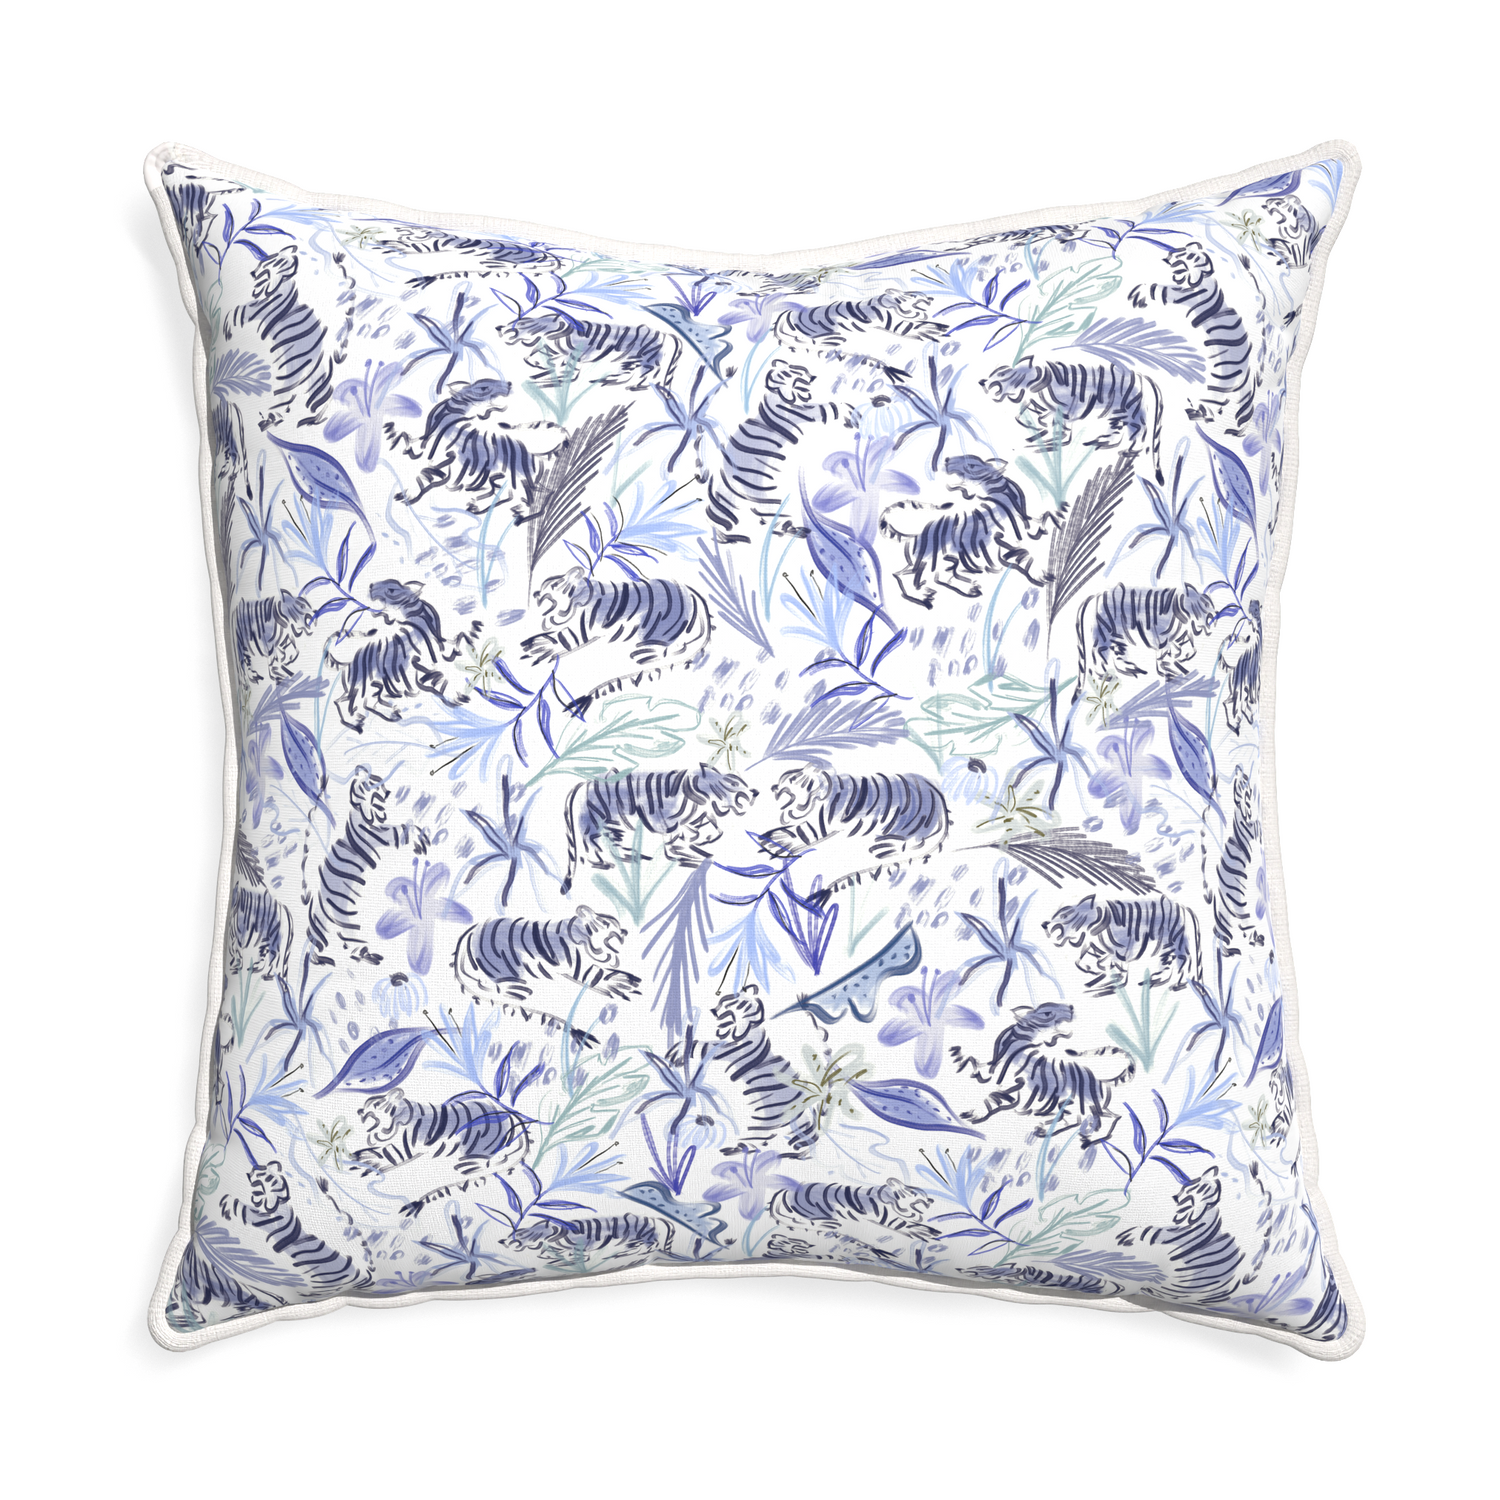 Euro-sham frida blue custom blue with intricate tiger designpillow with snow piping on white background